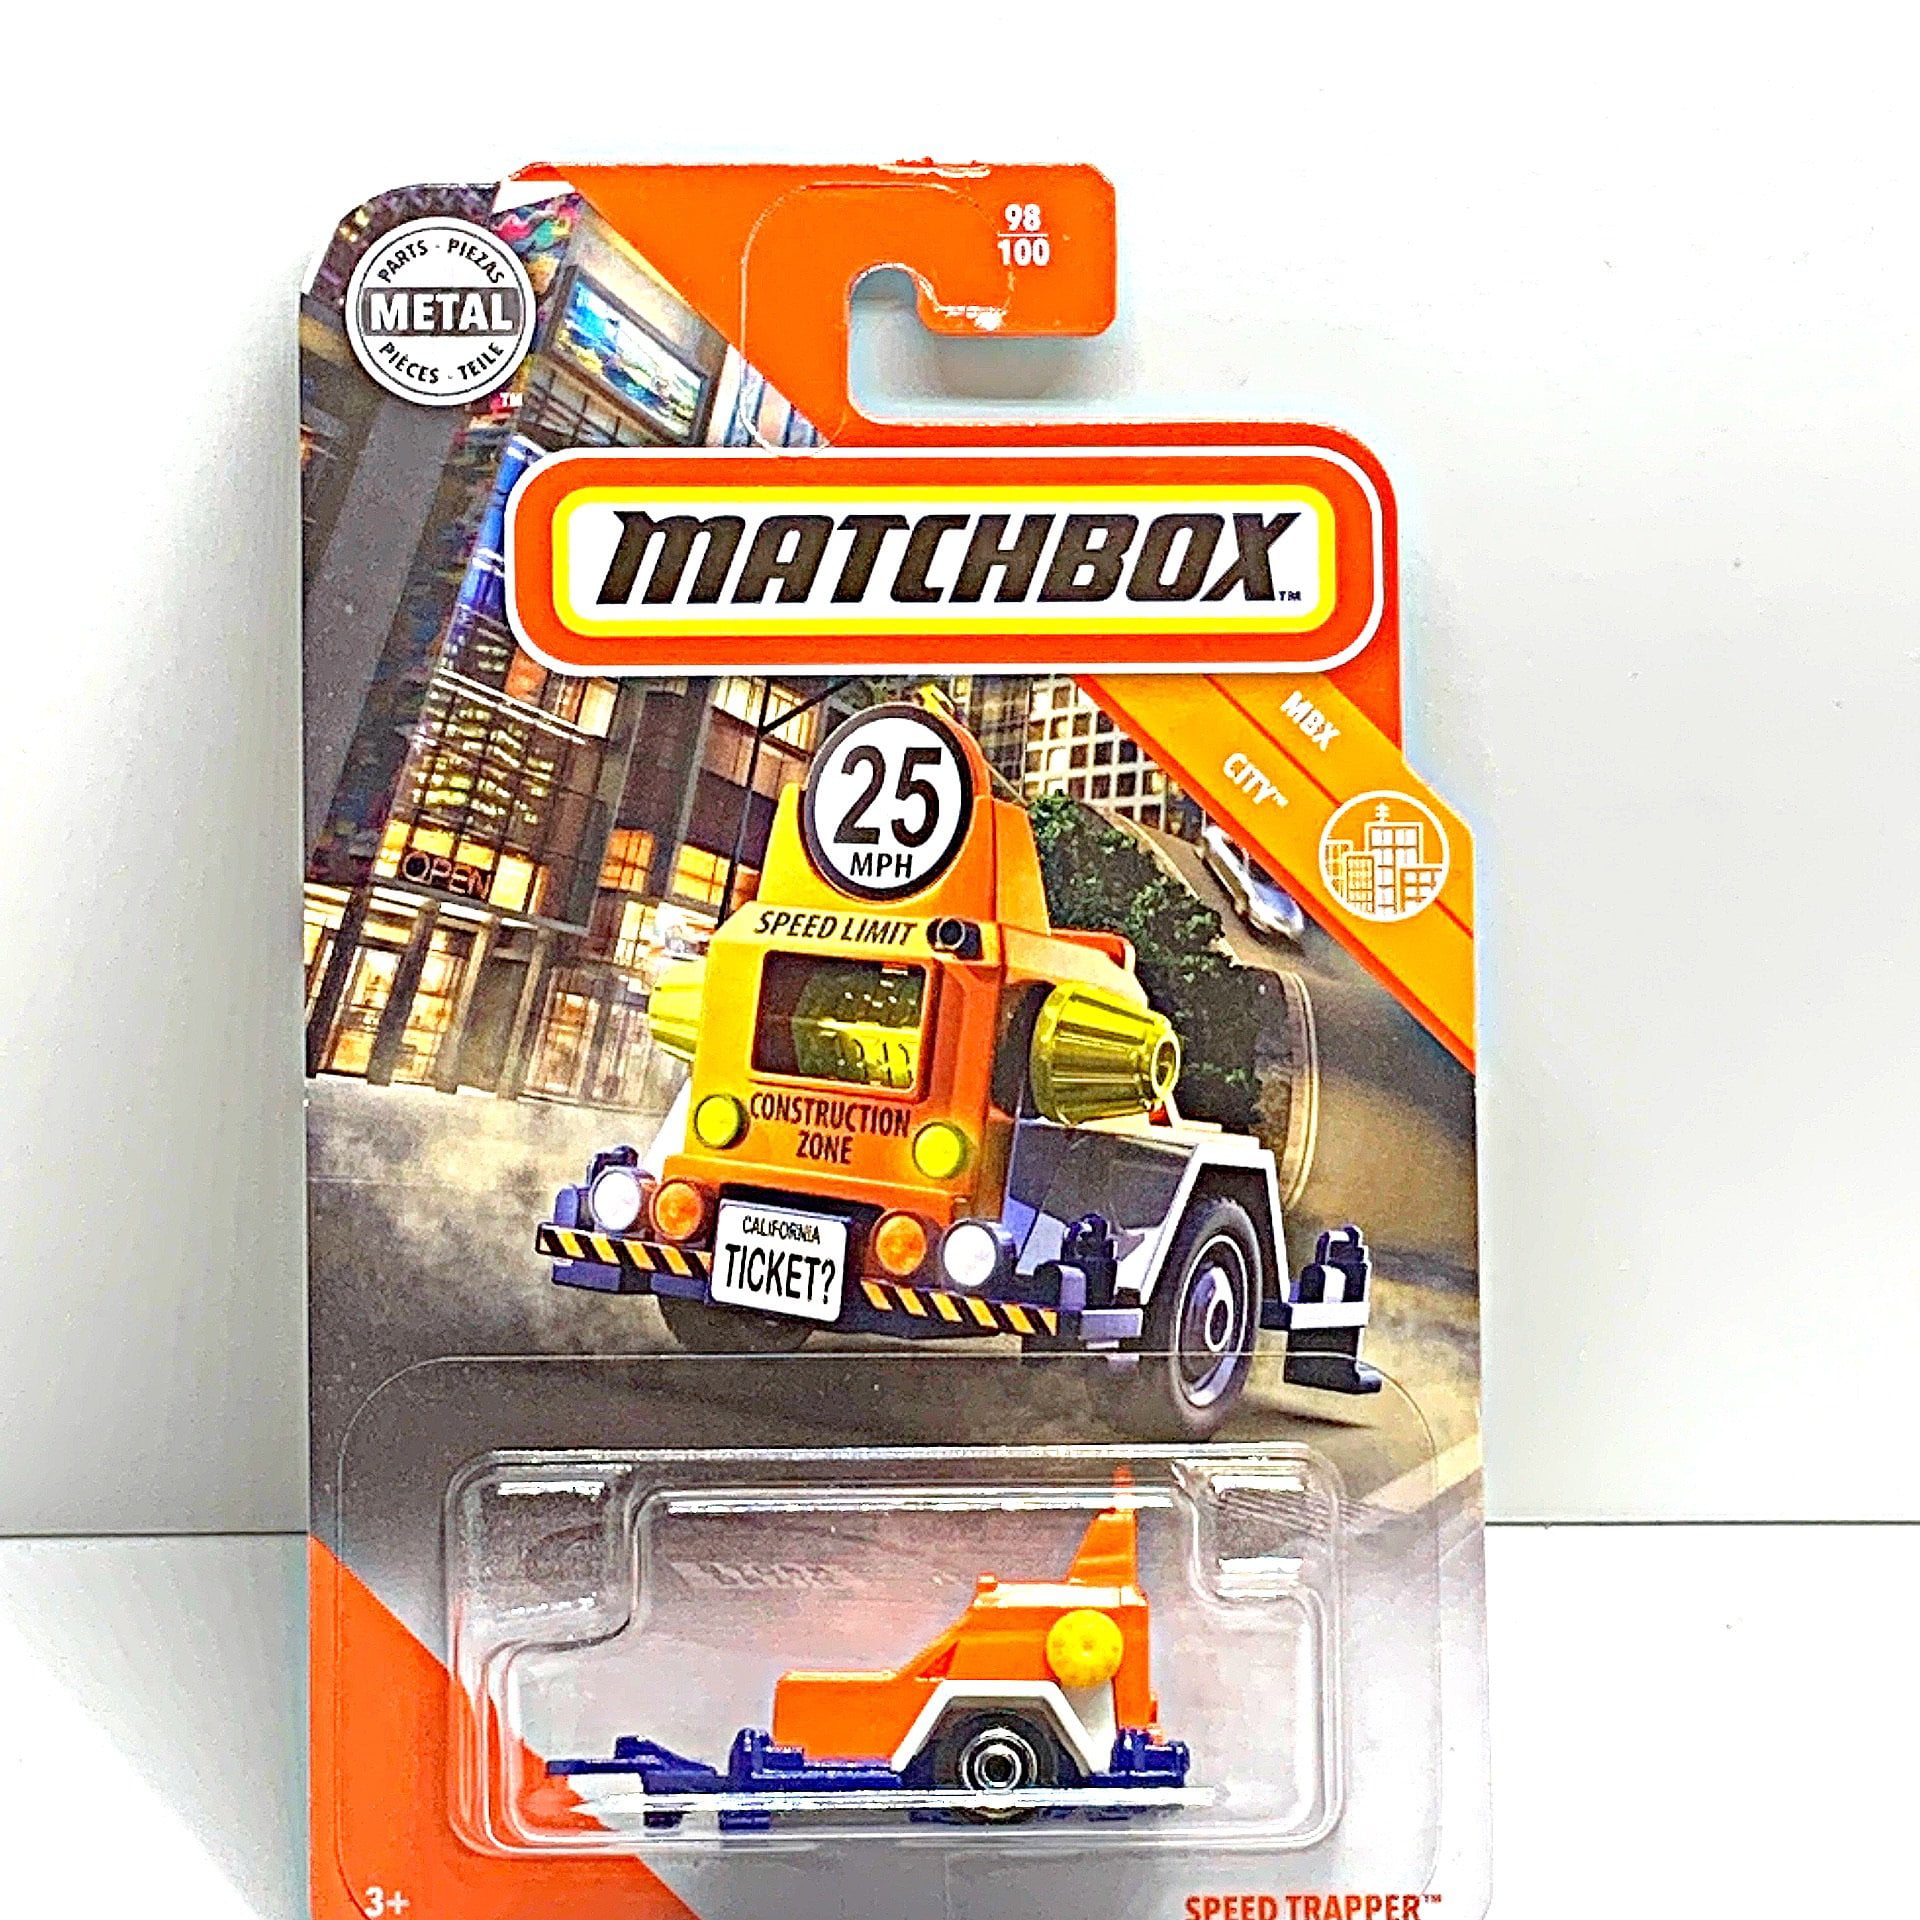 Matchbox Hard Back Story Book with Matchbox die-cast vehicle "Fire" attached 